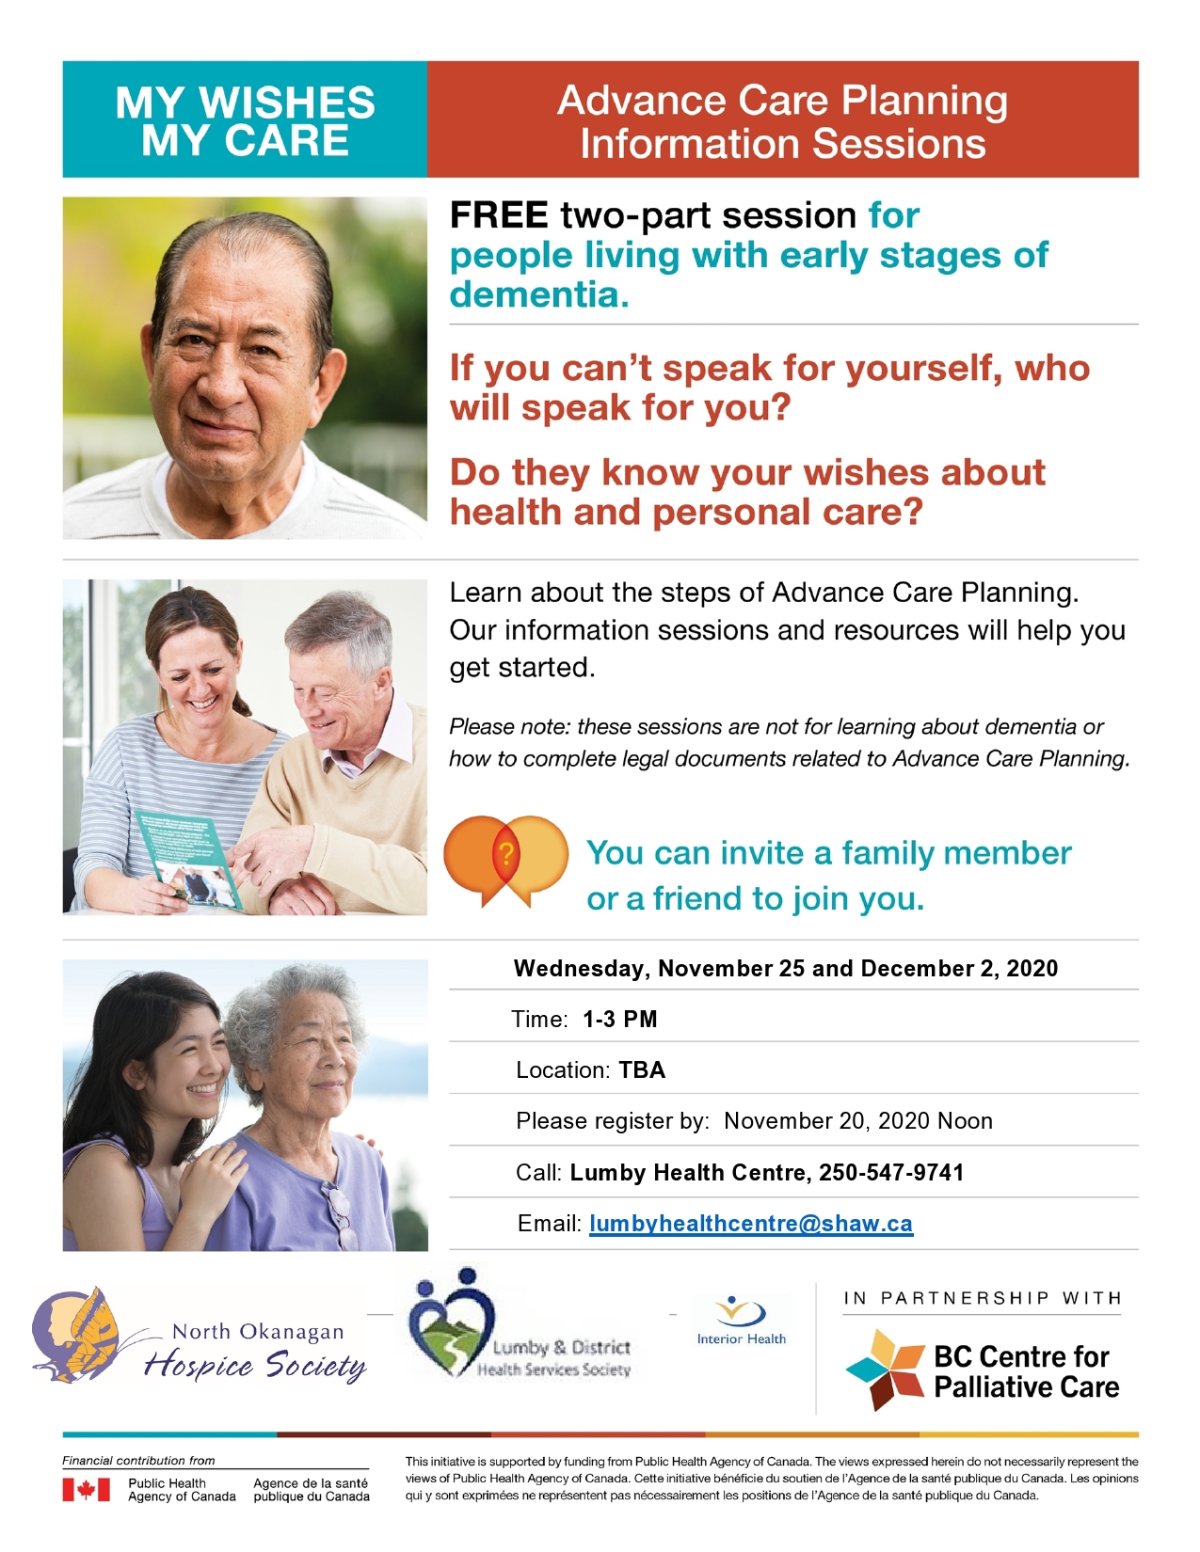 My Wishes, My Care: Advance Care Planning Information Sessions - image